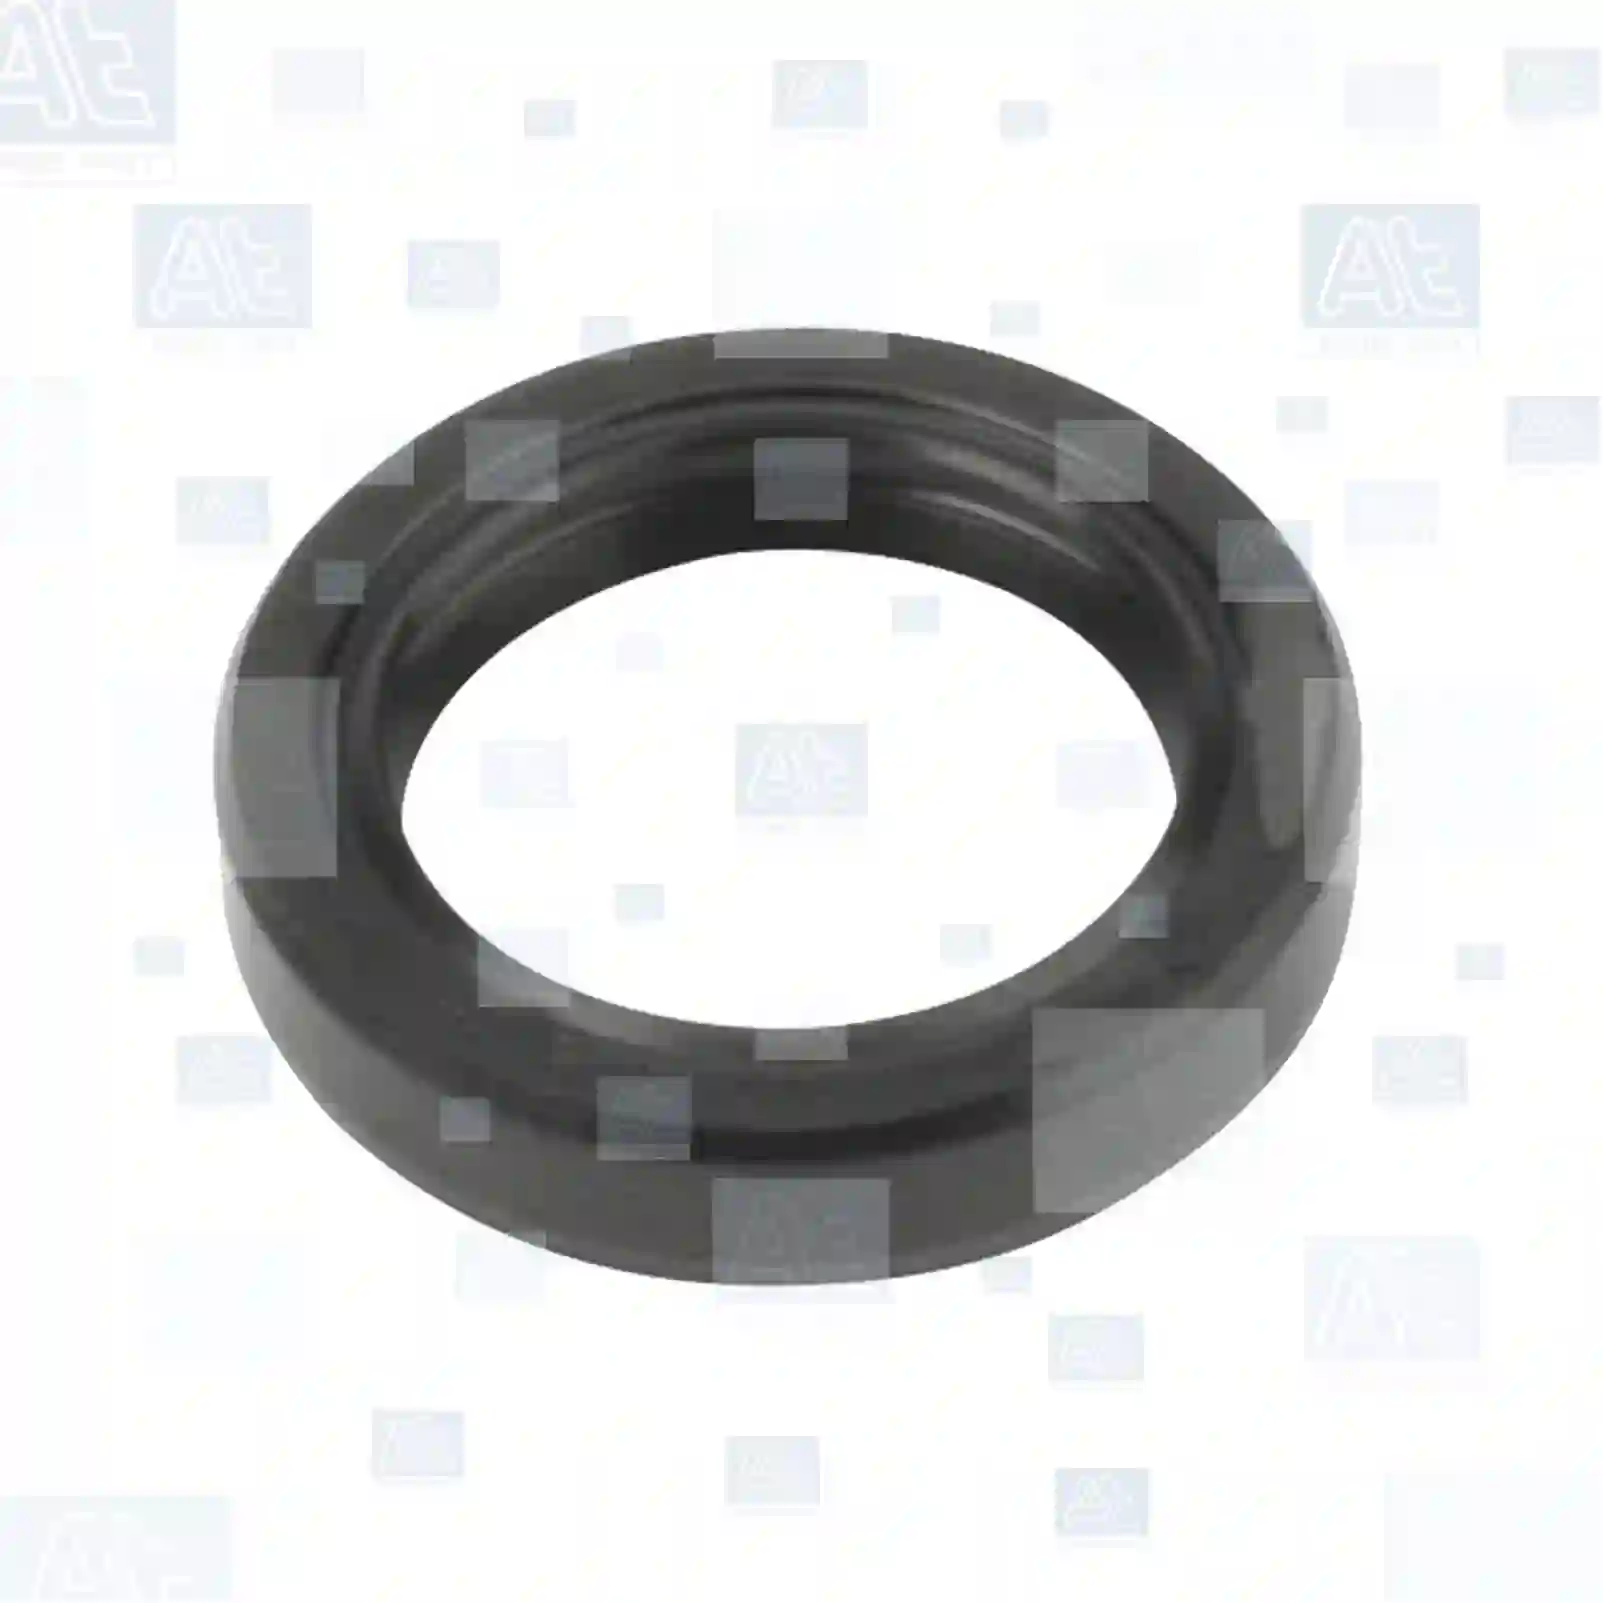 Oil seal, 77723357, 00012562623, 11140002198, 11141256562, 25210102704, 025109, 1456258, 1604095, 1677419, 242040, 01117850, 01125141, 01160738, 02914195, 12037952, X550041202000, 00768343, 00974035, 40001150, 40001720, 40002590, 0049976347, N600000578745, 00768343, 01125141, 01160738, 01299723, 02914195, 02961557, 02985040, 09007175, 2961557, 40101080, 42538283, 768343, RE45889, 01117850, 01125141, 01160738, 02914195, 12037952, 1441802X1, 06562611609, 06562690606, 81965010521, 81965010702, 0029972747, 0049976347, 0069974346, 0099979746, 0109976947, 0119974746, MD701735, 90402535, 12154595, 606901280264, 926681, S8717, 0003001115, 0024472325, 0024472583, 5000240259, 5000242264, 5000242878, 5000283659, 5000286593, 5000560793, 5000824272, 5001860153, 5001861999, 7077225, 215100100, 215200100, 192600, 254635, 329638, 4751140320, 61460080748, 880221534, 880221543, 99012221217, 0001409000, 0003829600, 20525916, 240022, 864299 ||  77723357 At Spare Part | Engine, Accelerator Pedal, Camshaft, Connecting Rod, Crankcase, Crankshaft, Cylinder Head, Engine Suspension Mountings, Exhaust Manifold, Exhaust Gas Recirculation, Filter Kits, Flywheel Housing, General Overhaul Kits, Engine, Intake Manifold, Oil Cleaner, Oil Cooler, Oil Filter, Oil Pump, Oil Sump, Piston & Liner, Sensor & Switch, Timing Case, Turbocharger, Cooling System, Belt Tensioner, Coolant Filter, Coolant Pipe, Corrosion Prevention Agent, Drive, Expansion Tank, Fan, Intercooler, Monitors & Gauges, Radiator, Thermostat, V-Belt / Timing belt, Water Pump, Fuel System, Electronical Injector Unit, Feed Pump, Fuel Filter, cpl., Fuel Gauge Sender,  Fuel Line, Fuel Pump, Fuel Tank, Injection Line Kit, Injection Pump, Exhaust System, Clutch & Pedal, Gearbox, Propeller Shaft, Axles, Brake System, Hubs & Wheels, Suspension, Leaf Spring, Universal Parts / Accessories, Steering, Electrical System, Cabin Oil seal, 77723357, 00012562623, 11140002198, 11141256562, 25210102704, 025109, 1456258, 1604095, 1677419, 242040, 01117850, 01125141, 01160738, 02914195, 12037952, X550041202000, 00768343, 00974035, 40001150, 40001720, 40002590, 0049976347, N600000578745, 00768343, 01125141, 01160738, 01299723, 02914195, 02961557, 02985040, 09007175, 2961557, 40101080, 42538283, 768343, RE45889, 01117850, 01125141, 01160738, 02914195, 12037952, 1441802X1, 06562611609, 06562690606, 81965010521, 81965010702, 0029972747, 0049976347, 0069974346, 0099979746, 0109976947, 0119974746, MD701735, 90402535, 12154595, 606901280264, 926681, S8717, 0003001115, 0024472325, 0024472583, 5000240259, 5000242264, 5000242878, 5000283659, 5000286593, 5000560793, 5000824272, 5001860153, 5001861999, 7077225, 215100100, 215200100, 192600, 254635, 329638, 4751140320, 61460080748, 880221534, 880221543, 99012221217, 0001409000, 0003829600, 20525916, 240022, 864299 ||  77723357 At Spare Part | Engine, Accelerator Pedal, Camshaft, Connecting Rod, Crankcase, Crankshaft, Cylinder Head, Engine Suspension Mountings, Exhaust Manifold, Exhaust Gas Recirculation, Filter Kits, Flywheel Housing, General Overhaul Kits, Engine, Intake Manifold, Oil Cleaner, Oil Cooler, Oil Filter, Oil Pump, Oil Sump, Piston & Liner, Sensor & Switch, Timing Case, Turbocharger, Cooling System, Belt Tensioner, Coolant Filter, Coolant Pipe, Corrosion Prevention Agent, Drive, Expansion Tank, Fan, Intercooler, Monitors & Gauges, Radiator, Thermostat, V-Belt / Timing belt, Water Pump, Fuel System, Electronical Injector Unit, Feed Pump, Fuel Filter, cpl., Fuel Gauge Sender,  Fuel Line, Fuel Pump, Fuel Tank, Injection Line Kit, Injection Pump, Exhaust System, Clutch & Pedal, Gearbox, Propeller Shaft, Axles, Brake System, Hubs & Wheels, Suspension, Leaf Spring, Universal Parts / Accessories, Steering, Electrical System, Cabin